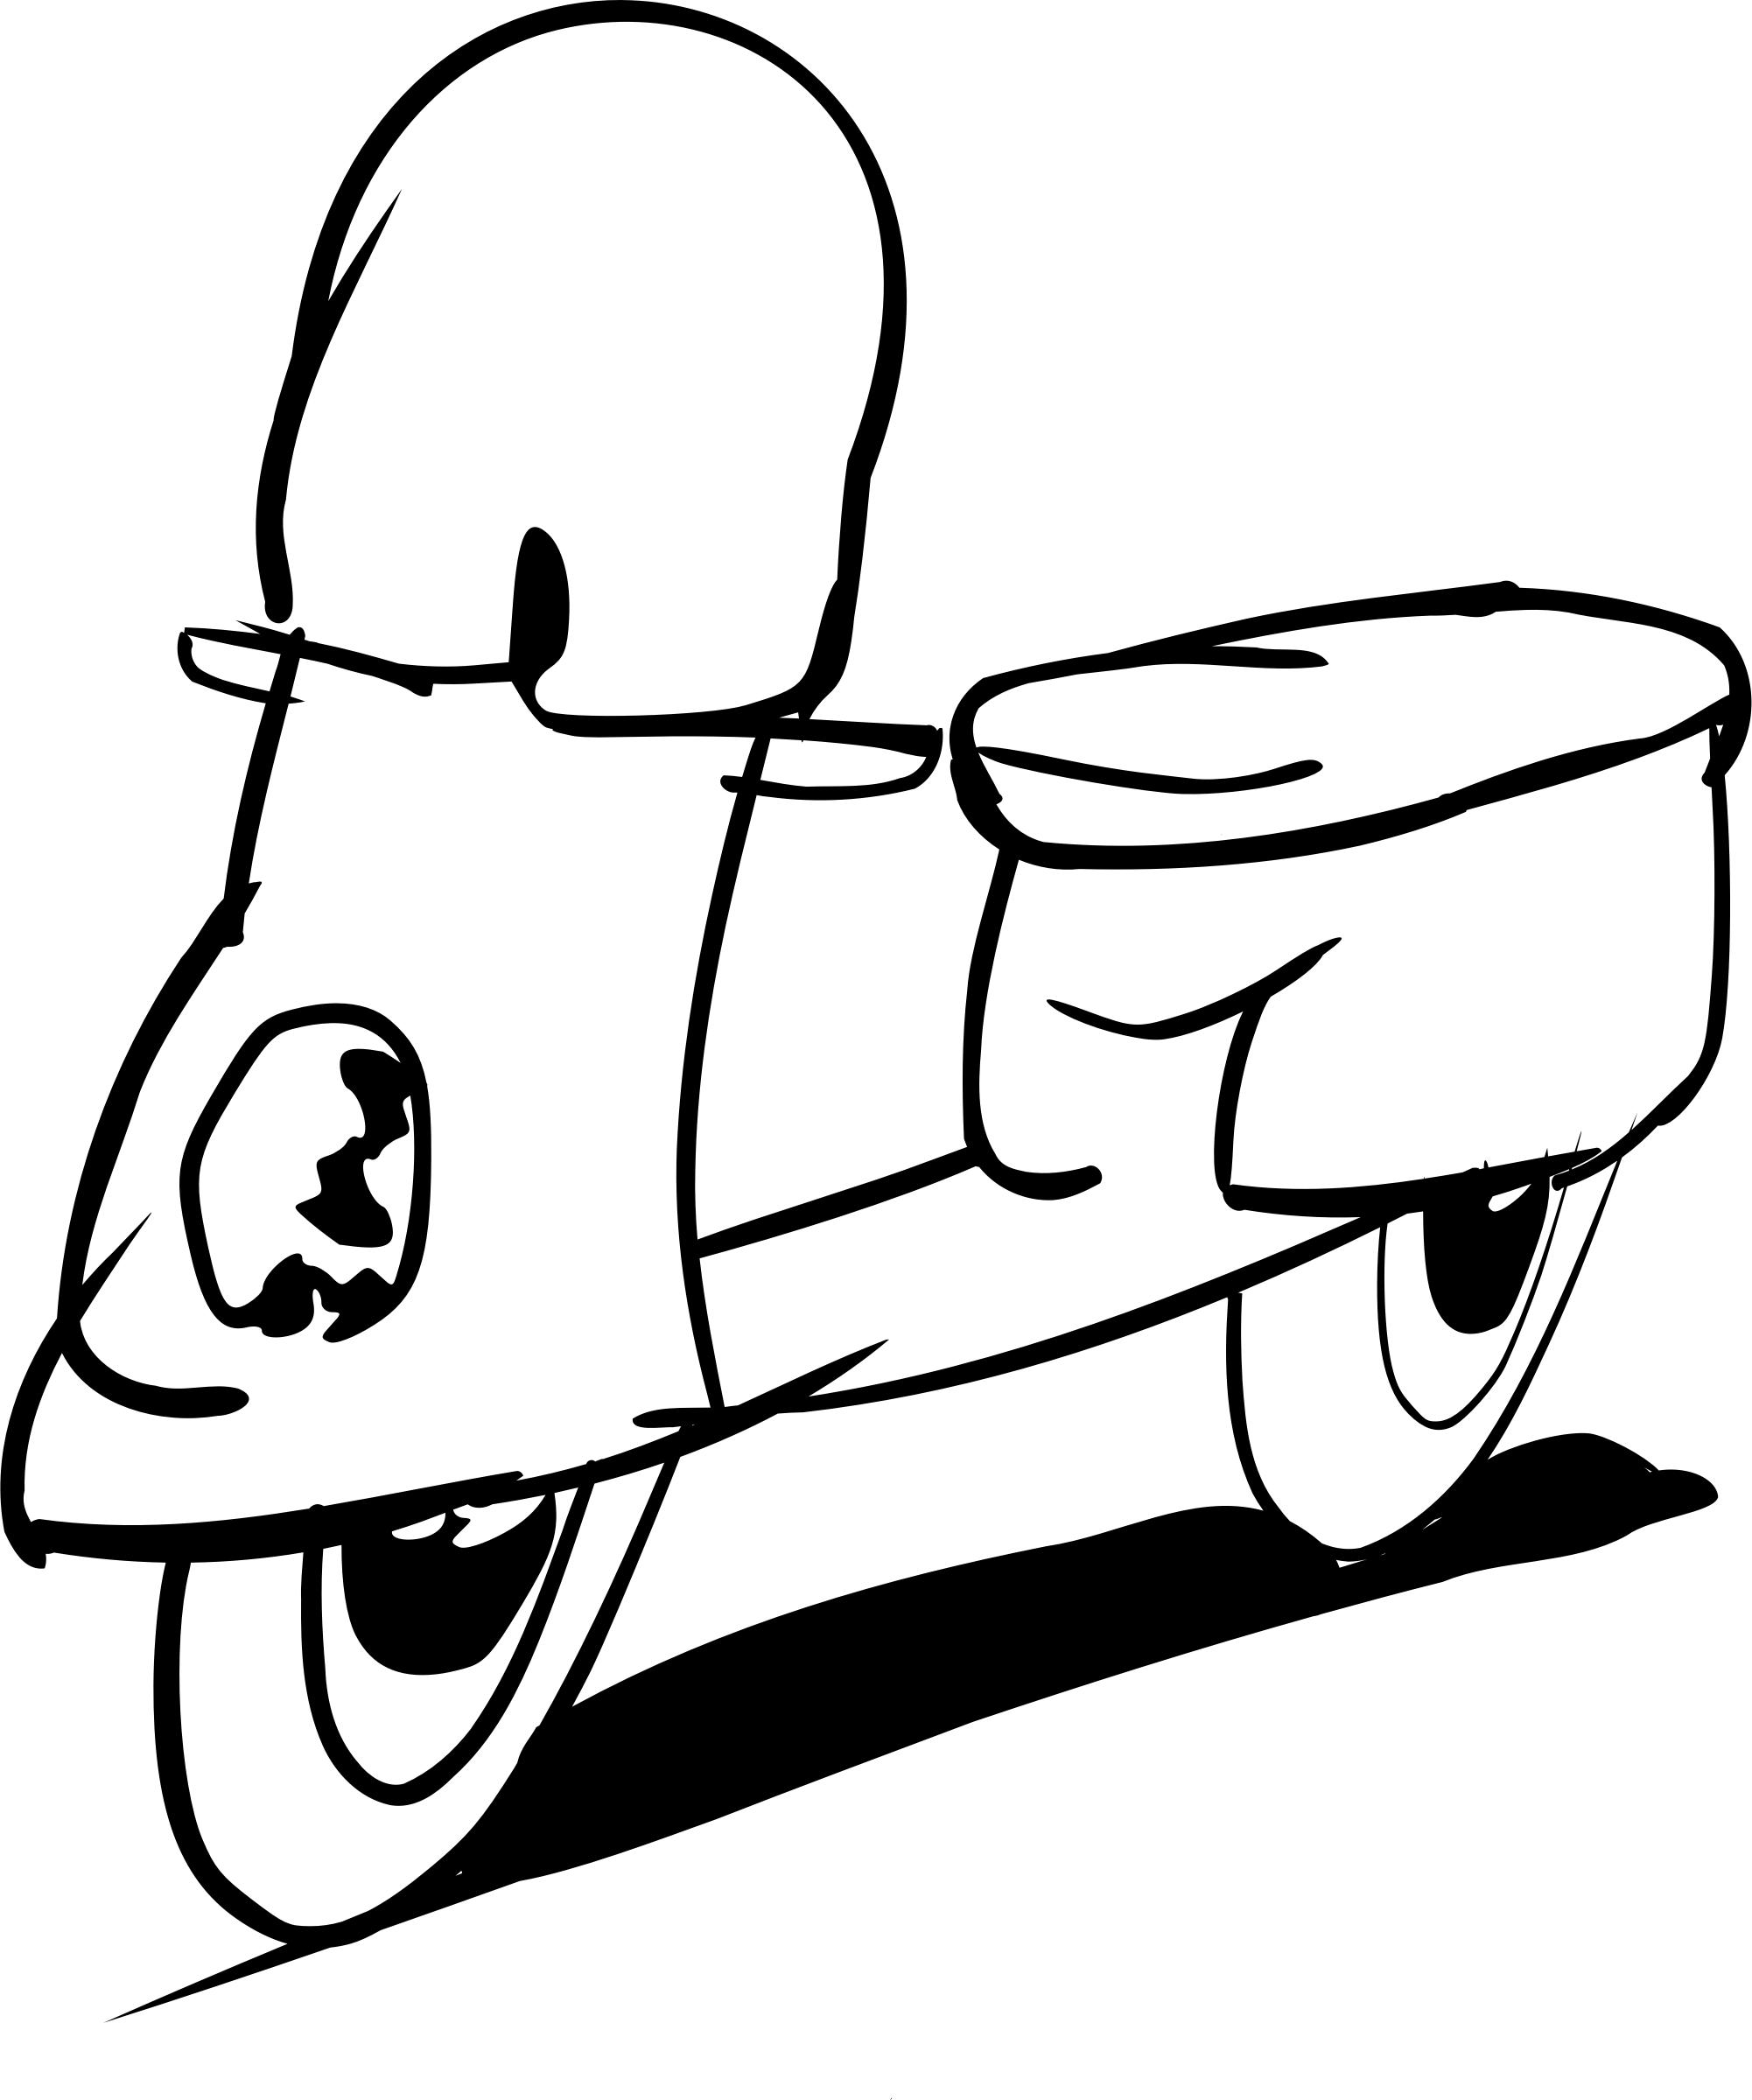 Scooter line drawing PNG icons